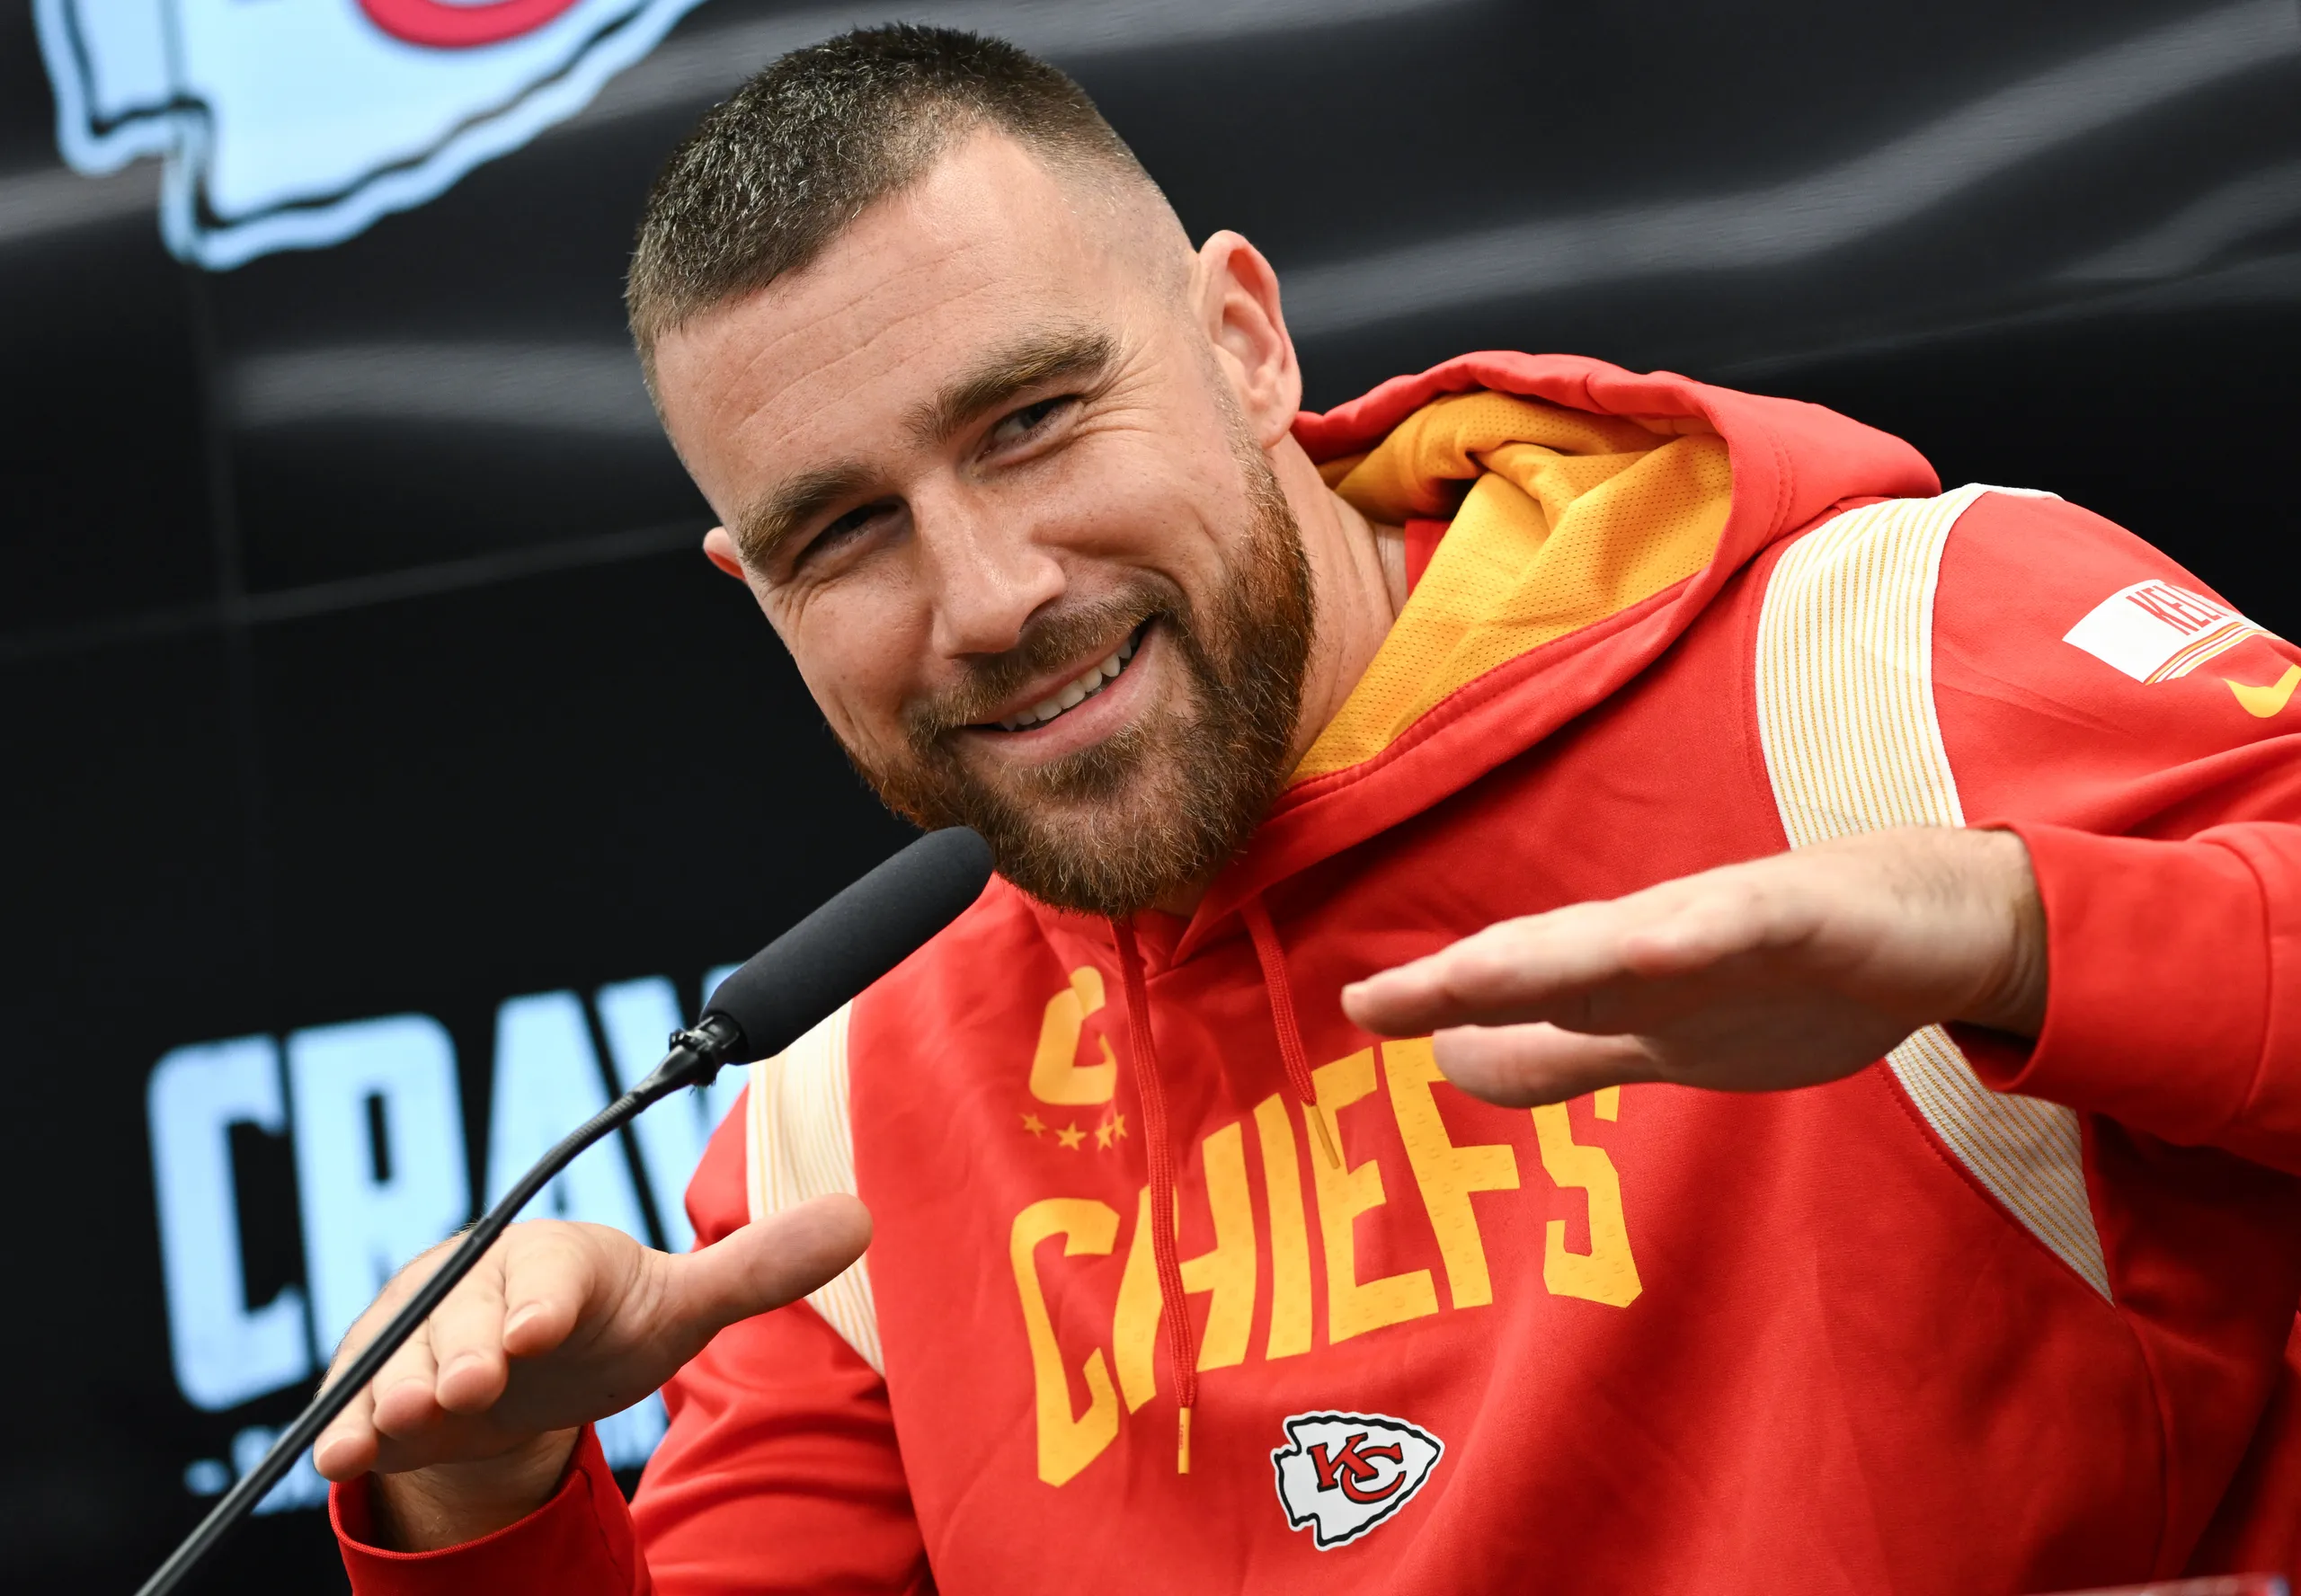 "We were hoping for the perfect surprise!" Fans express discontent with Travis Kelce and Taylor Swift for keeping their first pregnancy a secret.